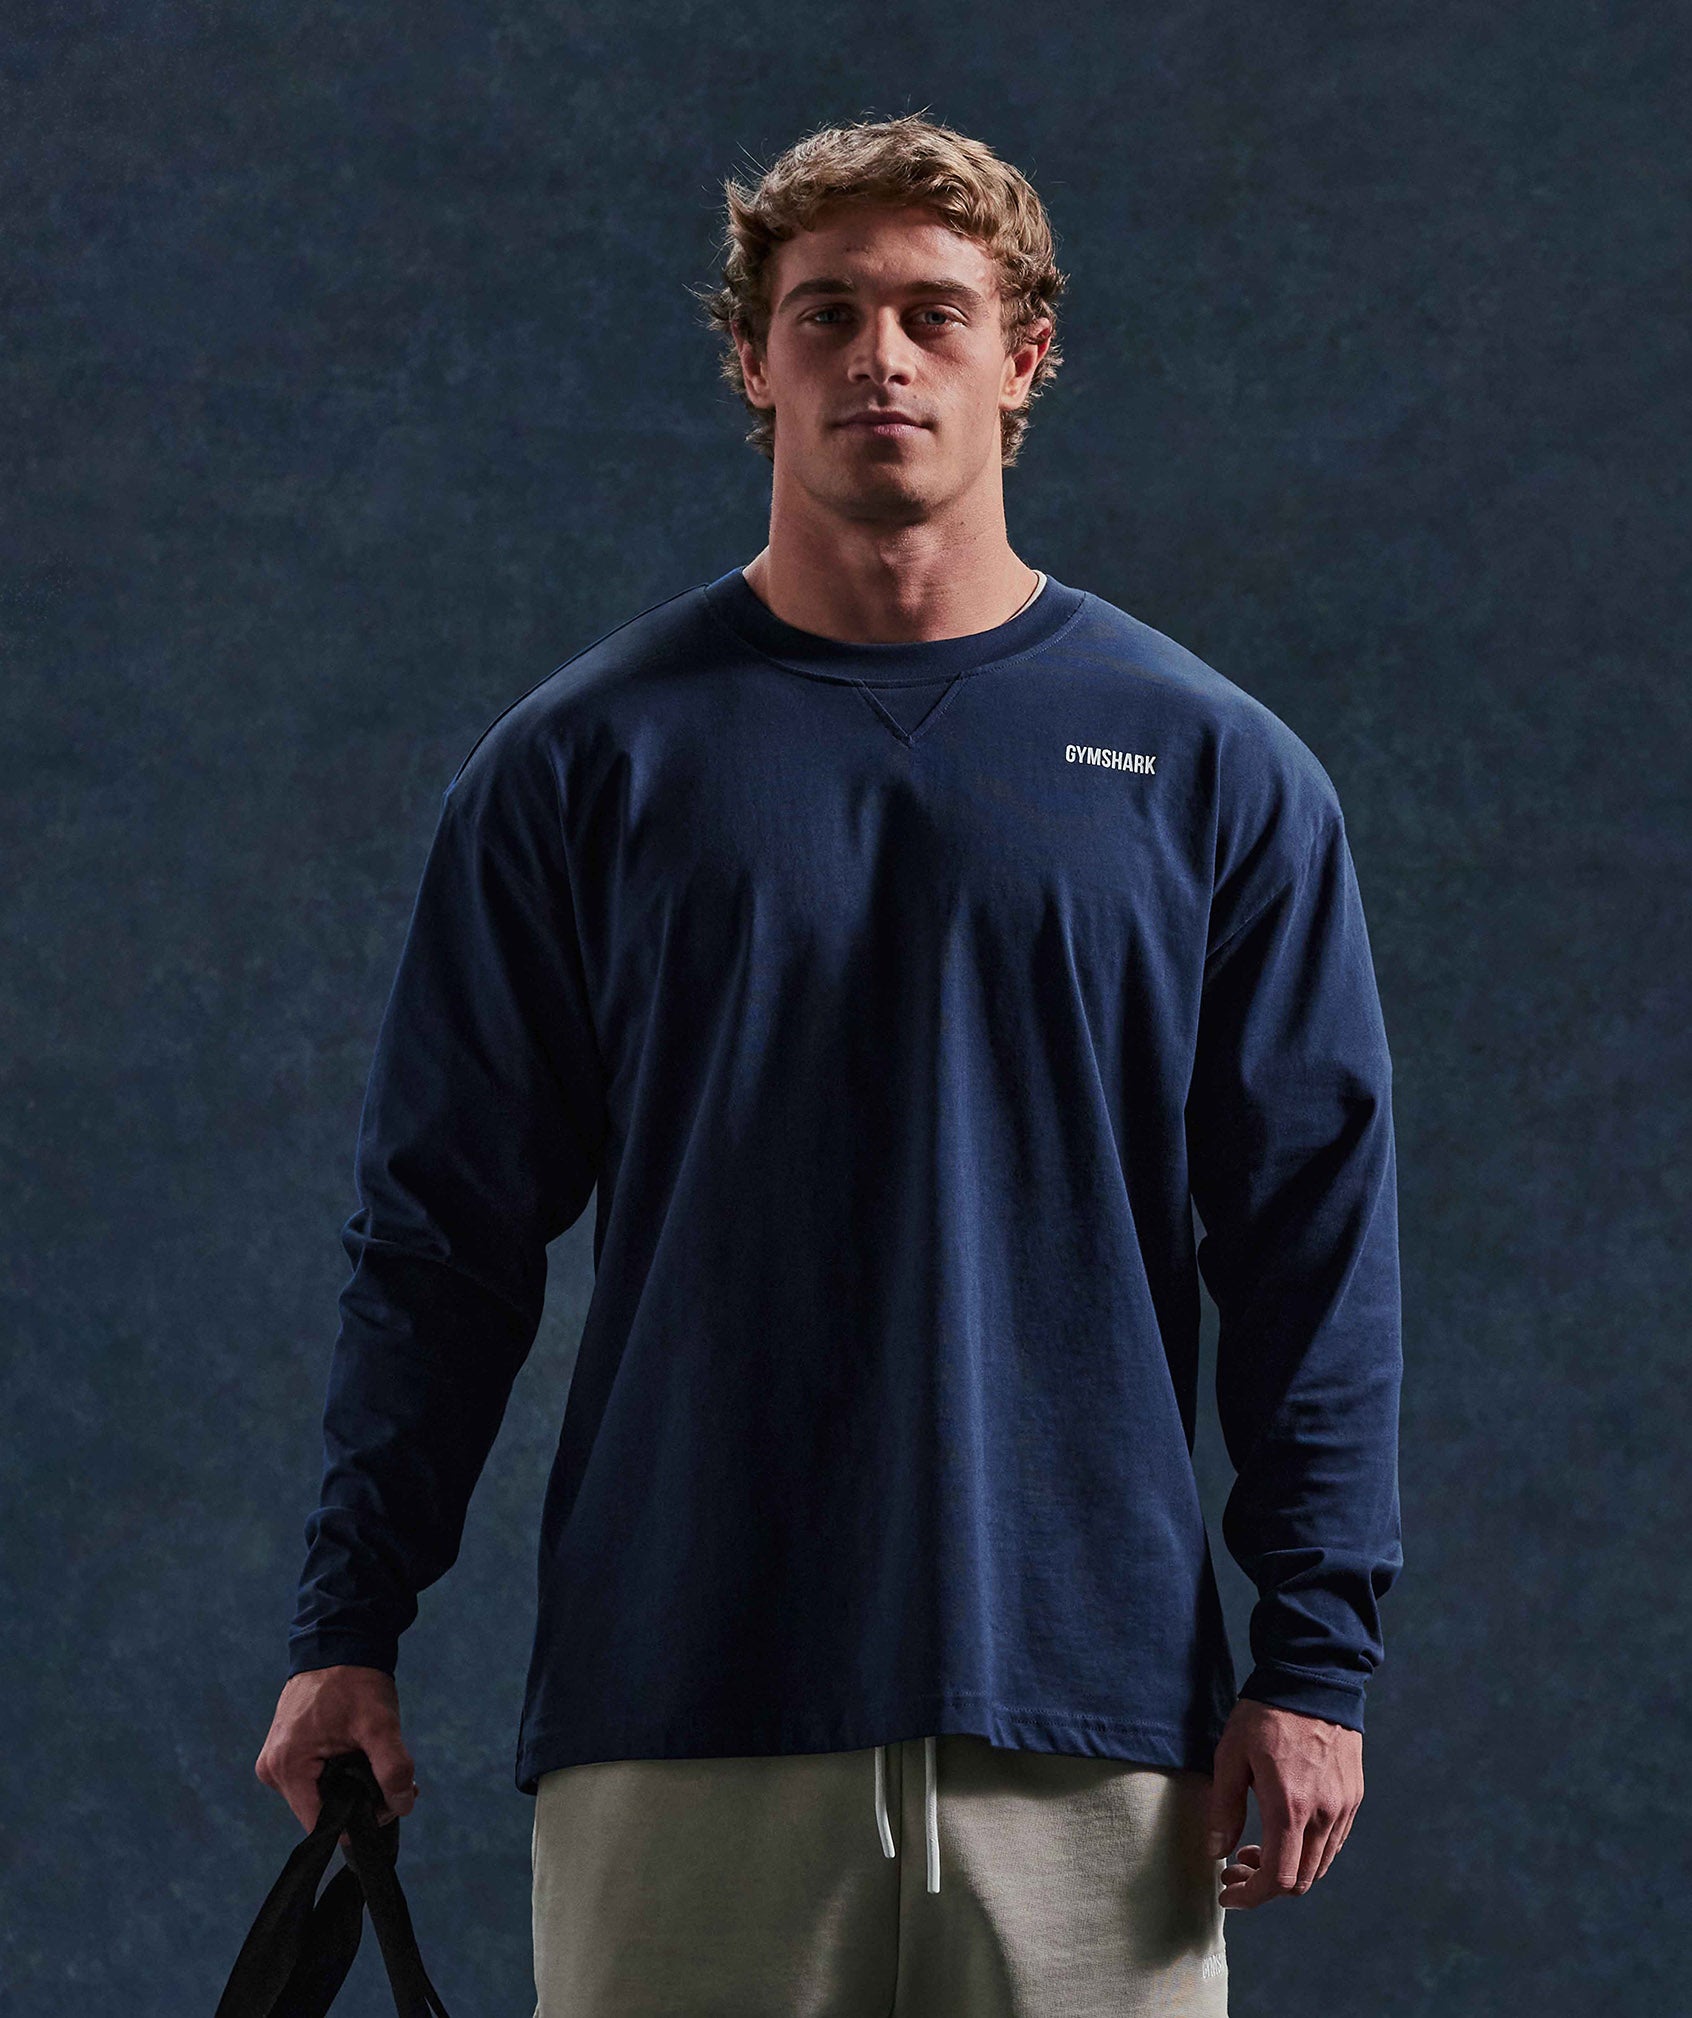 Rest Day Sweats Long Sleeve T-Shirt in Navy is out of stock